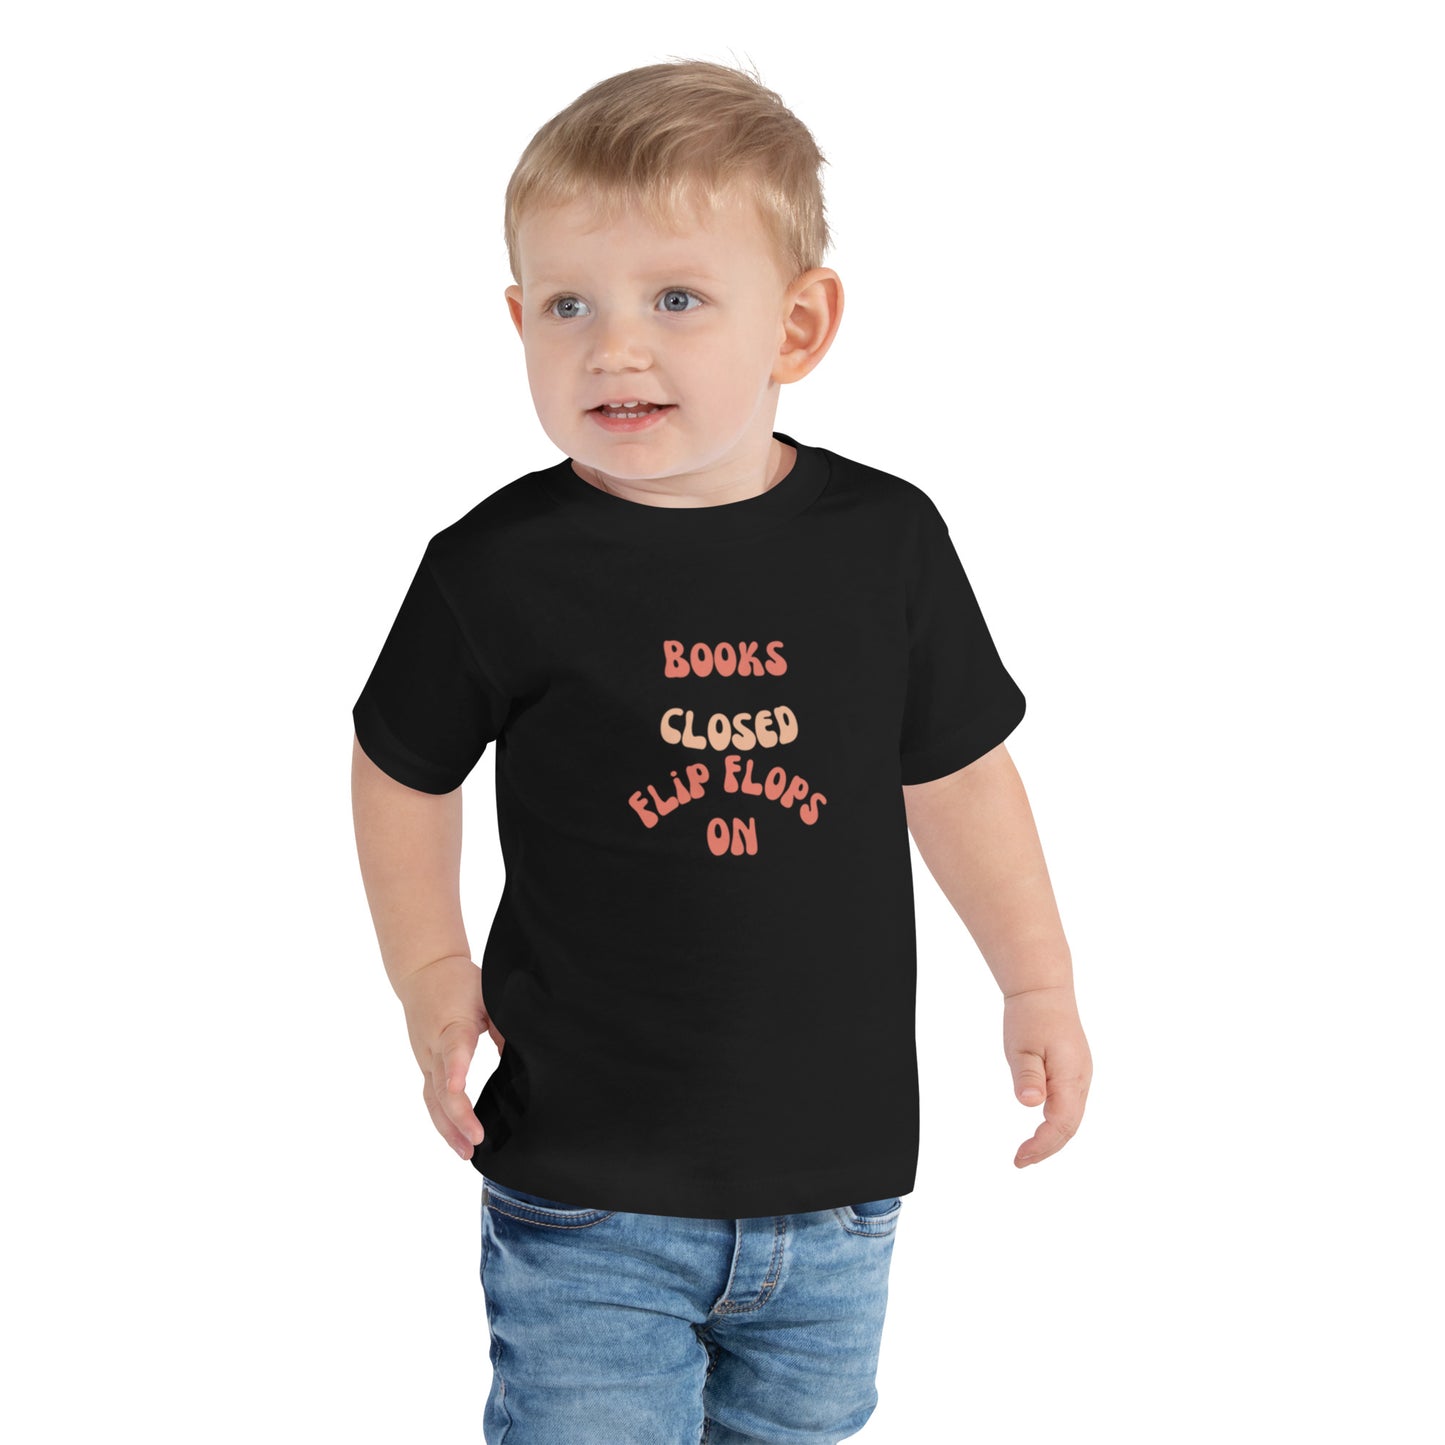 "Books Closed, Flip Flops On" - Comfortable and Stylish Toddler Short Sleeve Tee